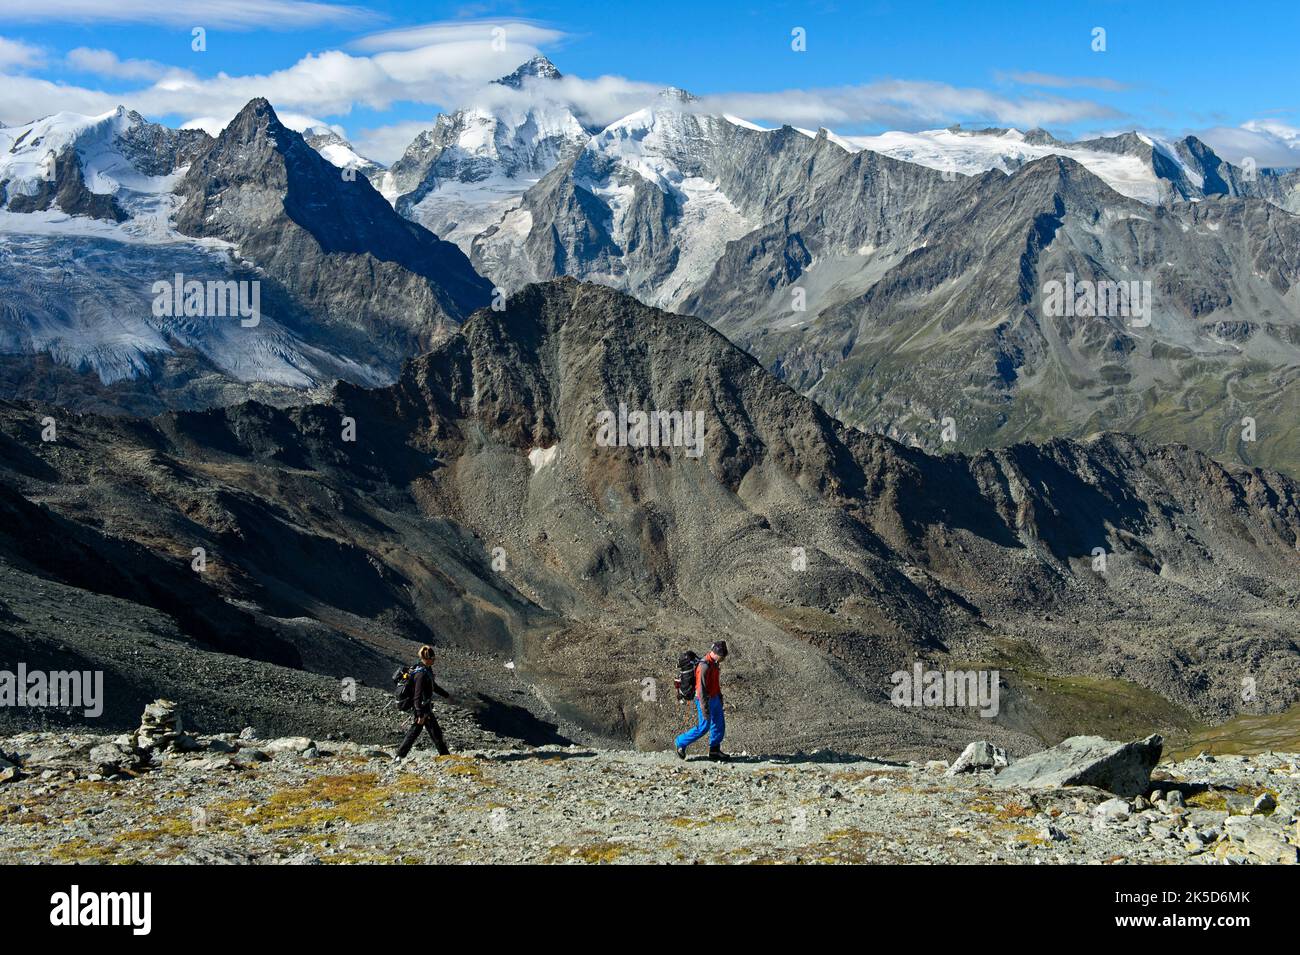 Mountain hikers in front of the chain of peaks of the Valais Alps, peaks from left to right Blanc de Moming, Besso, Dent Blanche, Grand Cornier, Zinal, Val d'Anniviers, Valais, Switzerland Stock Photo